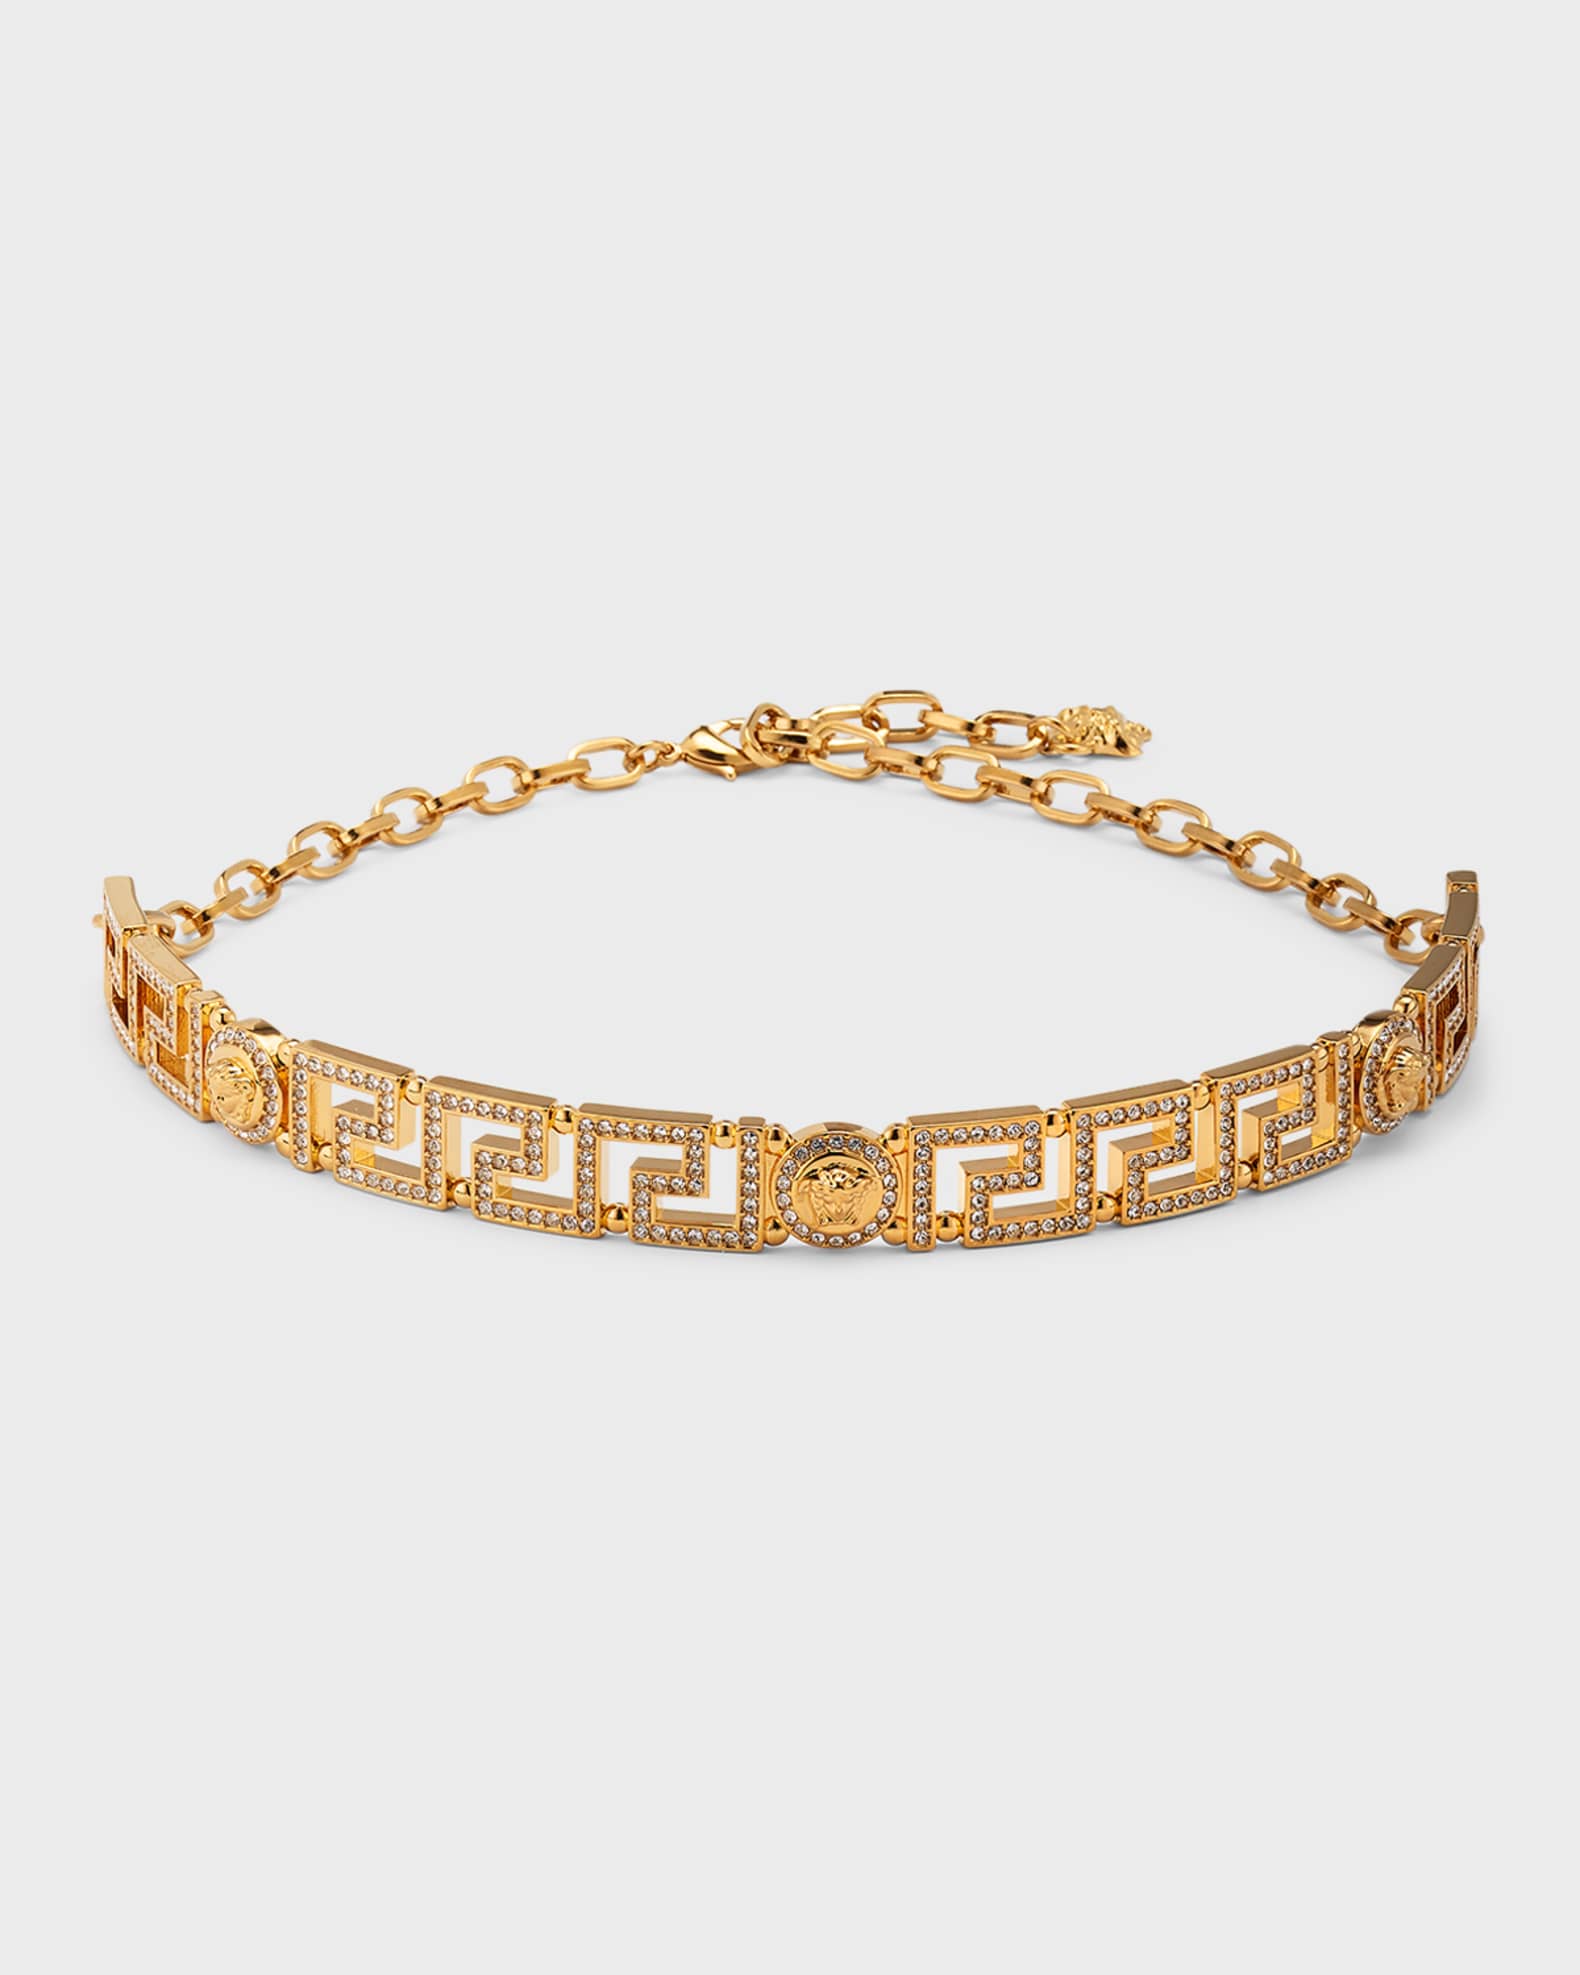 Versace Medusa Choker Necklace with Strass Crystals | Neiman Marcus